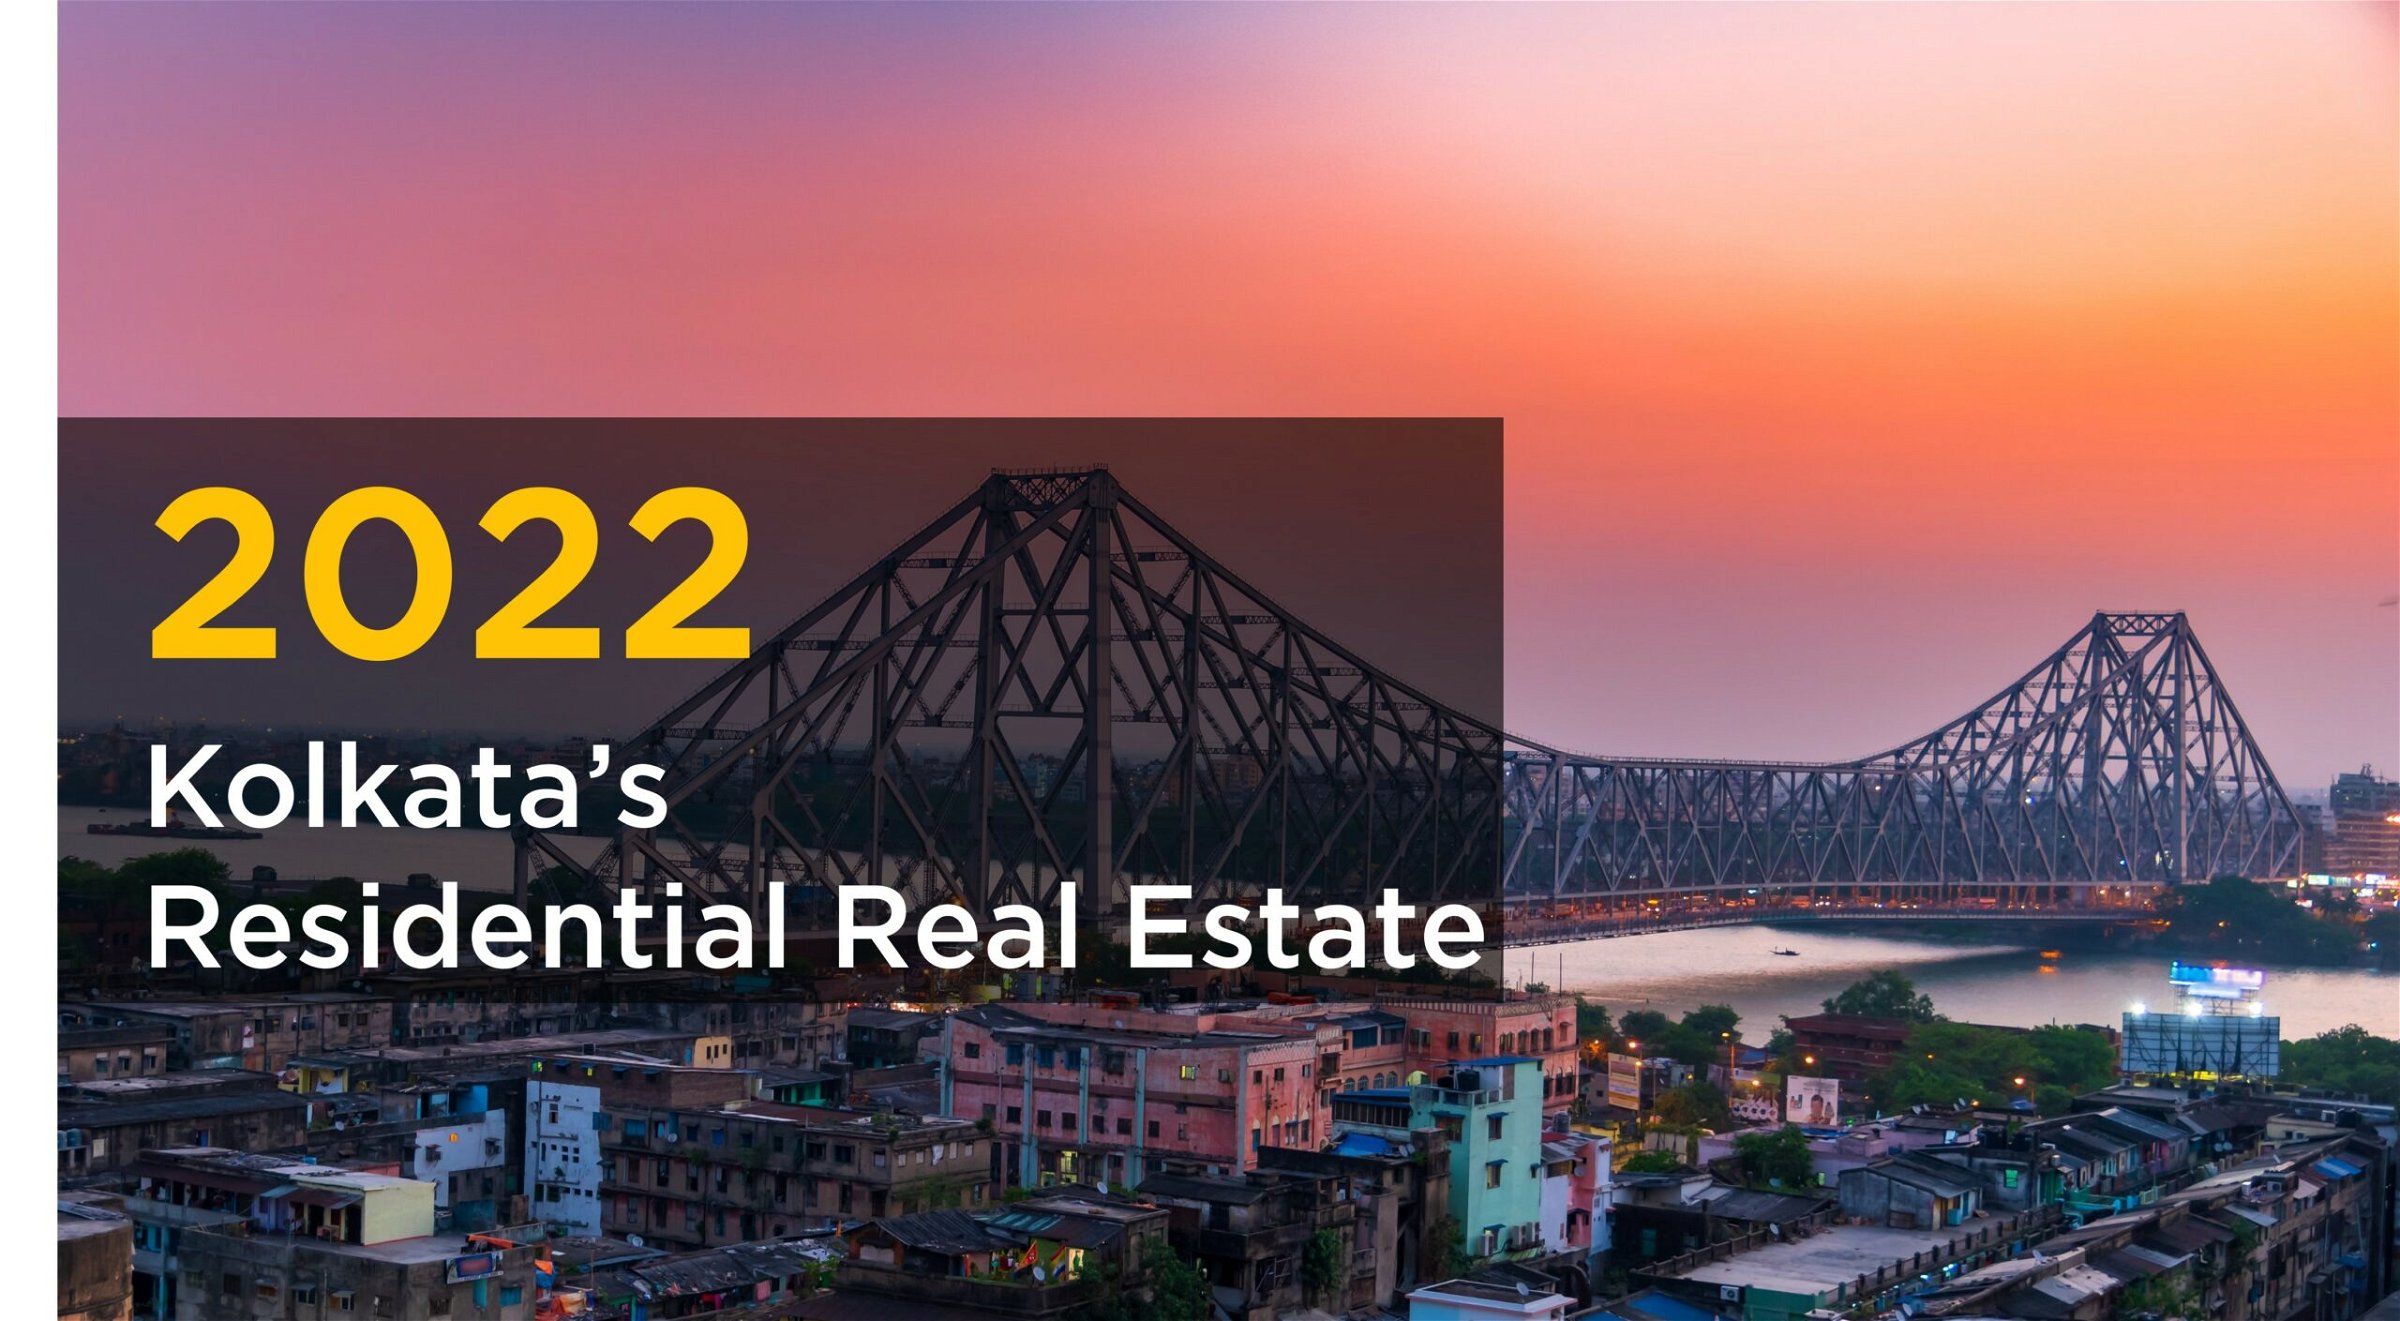 Kolkata residential new supply registered a 1.5x growth in 2022